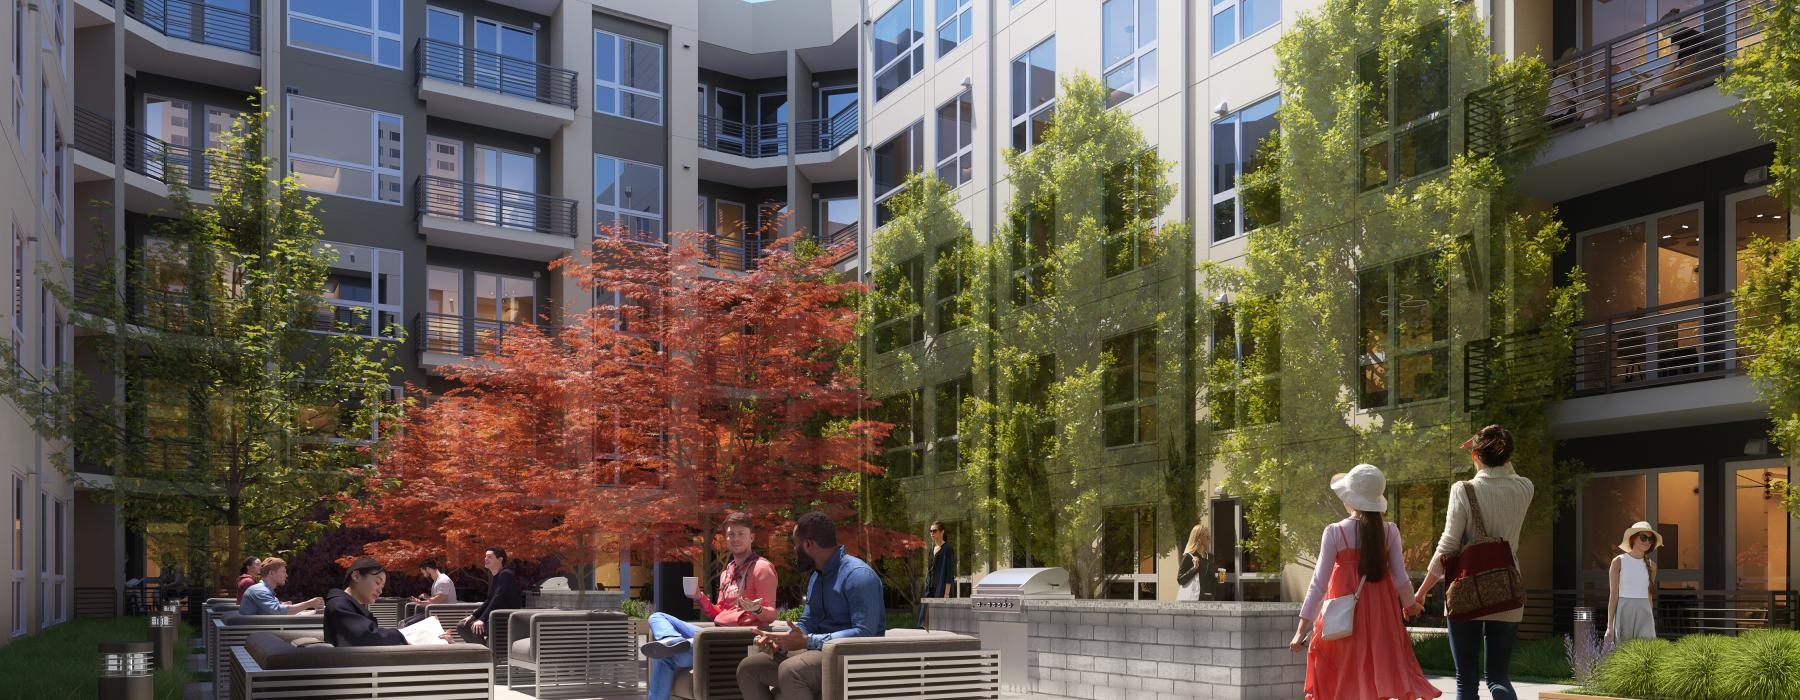 a couple people sitting on a bench in front of a building with trees throughout a courtyard